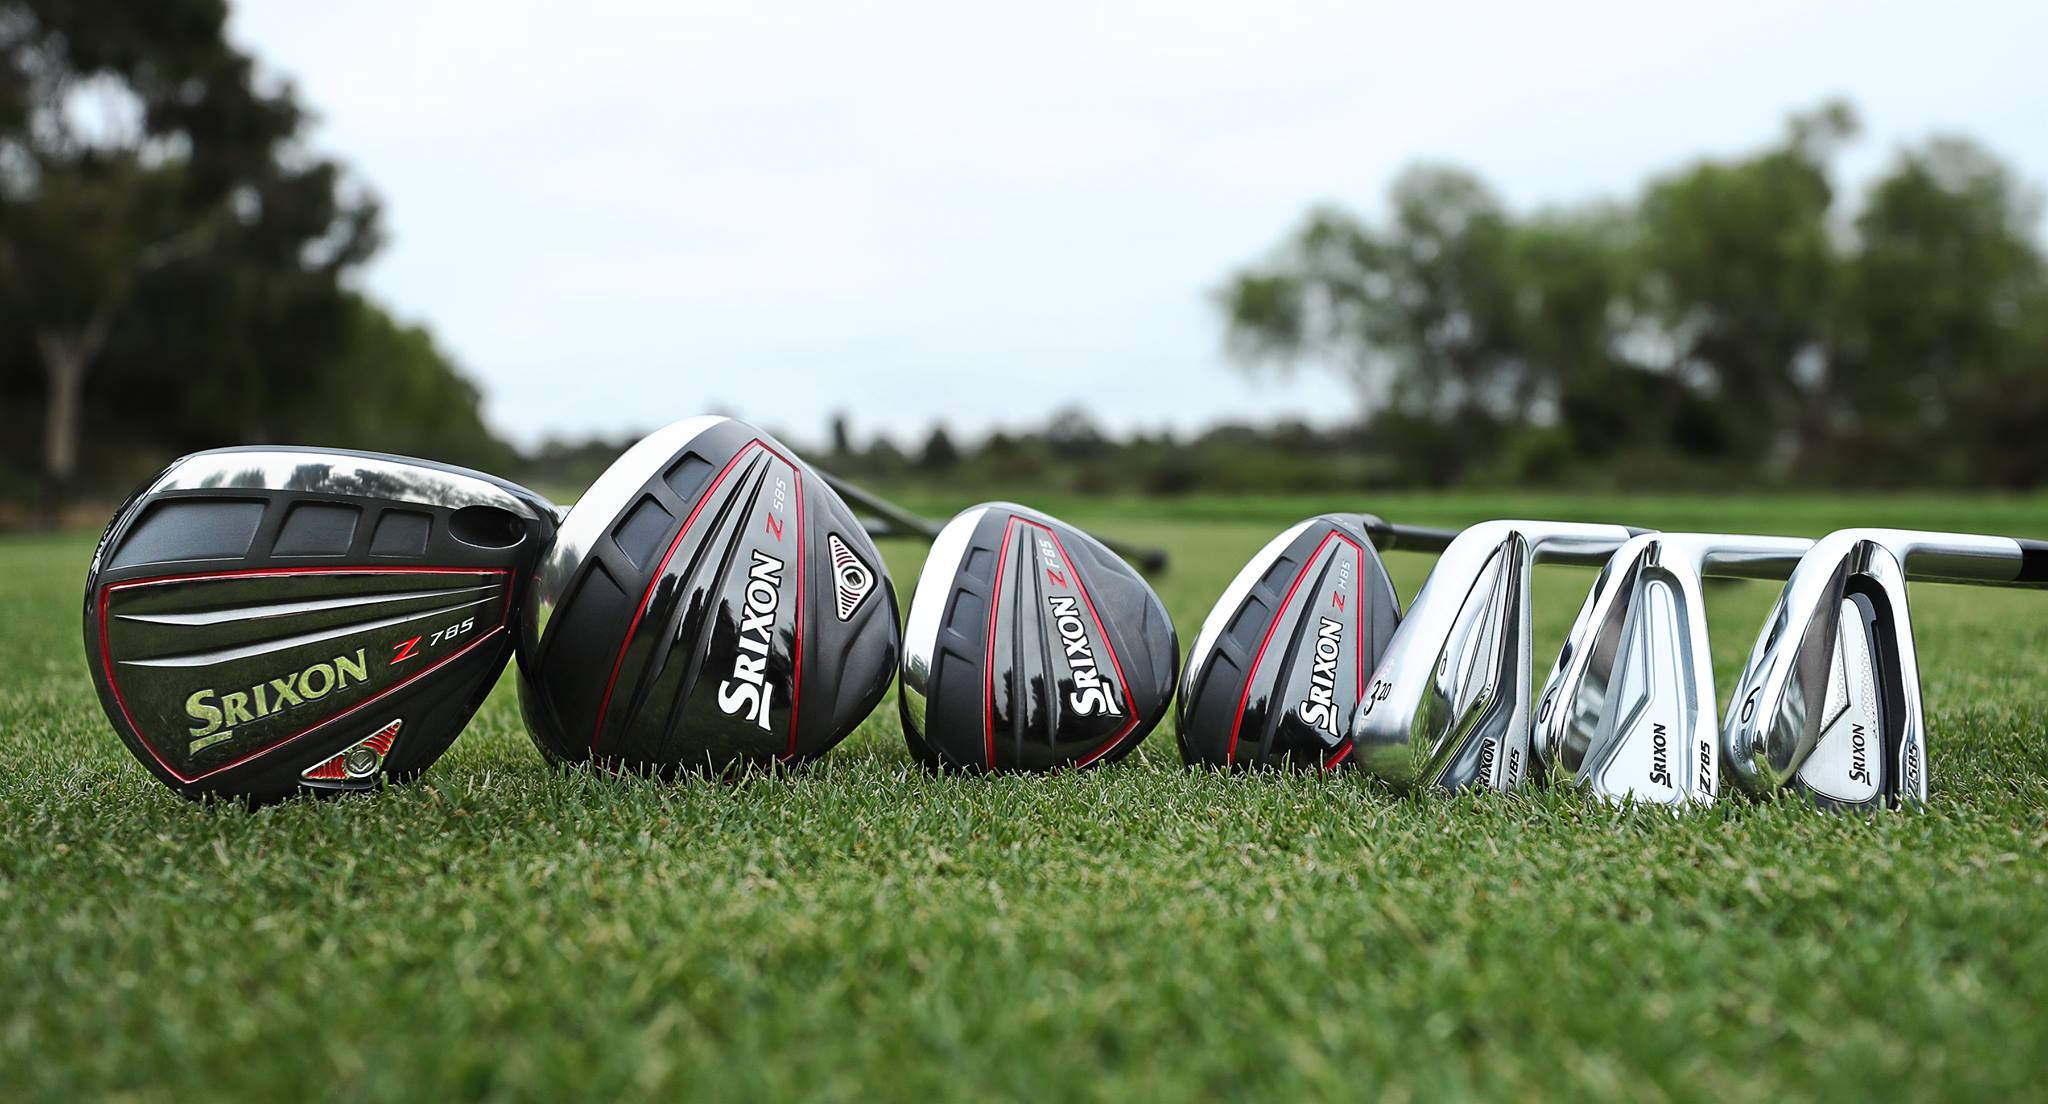 Srixon Golf Demo Day at Westwood Park Golf Course